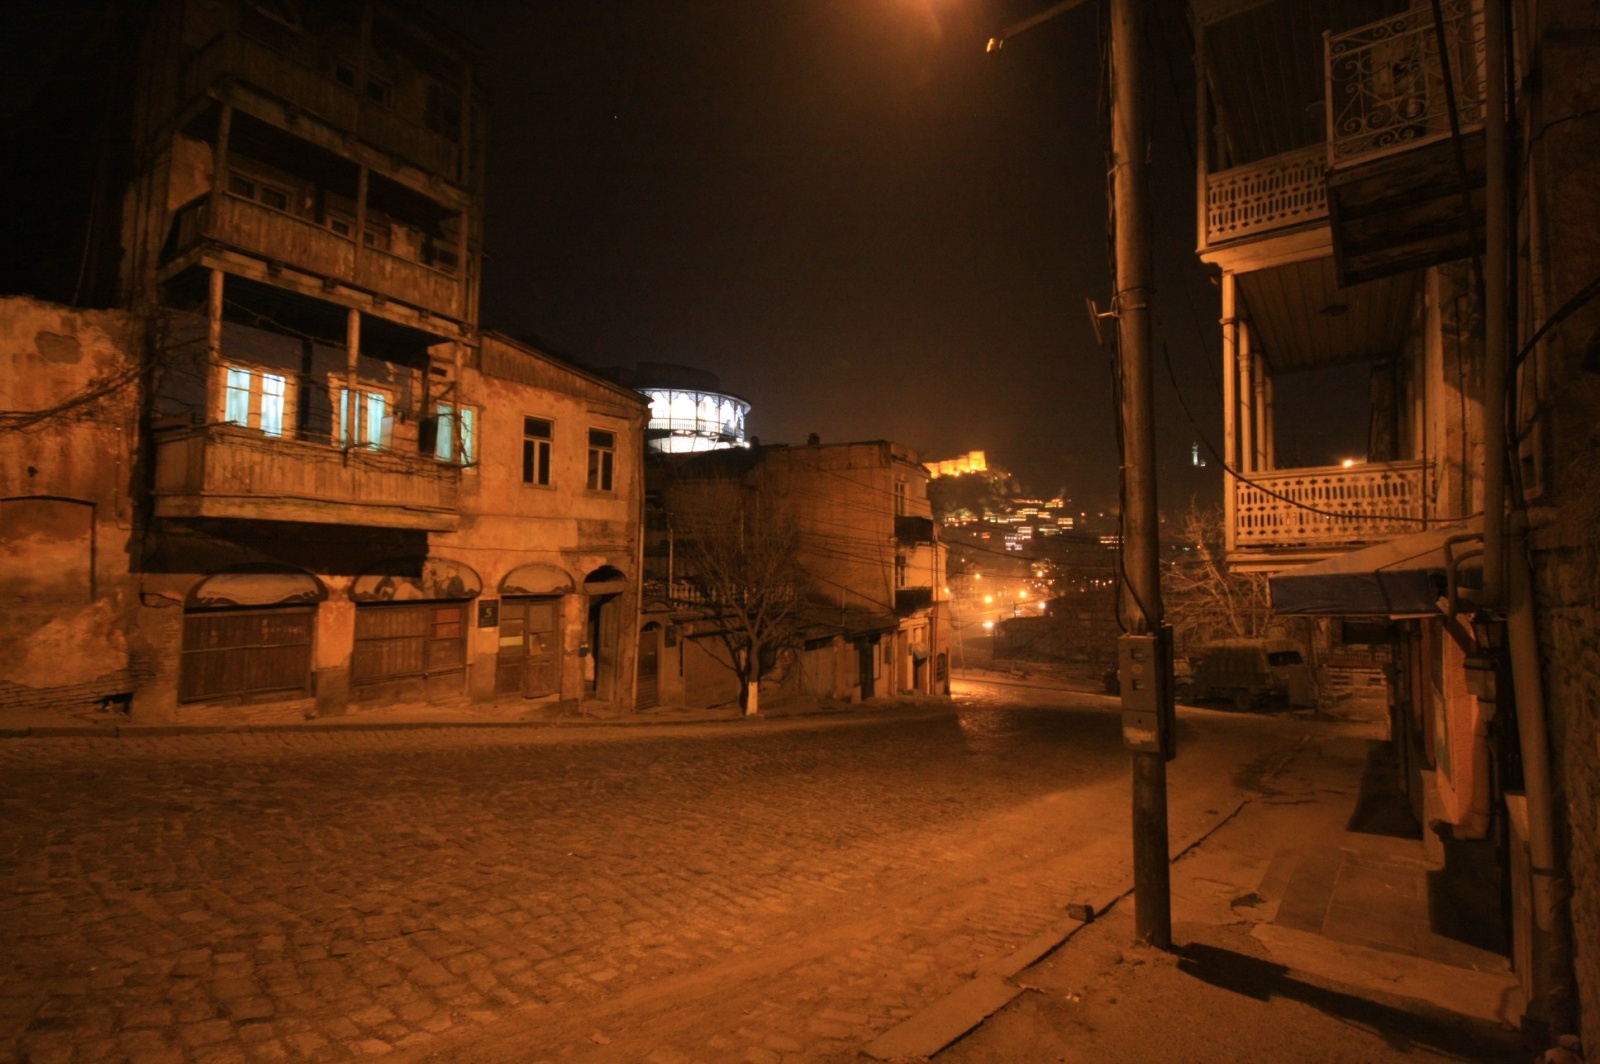 Tbilisi feels very safe to walk at night despite Lonely Planet's warnings